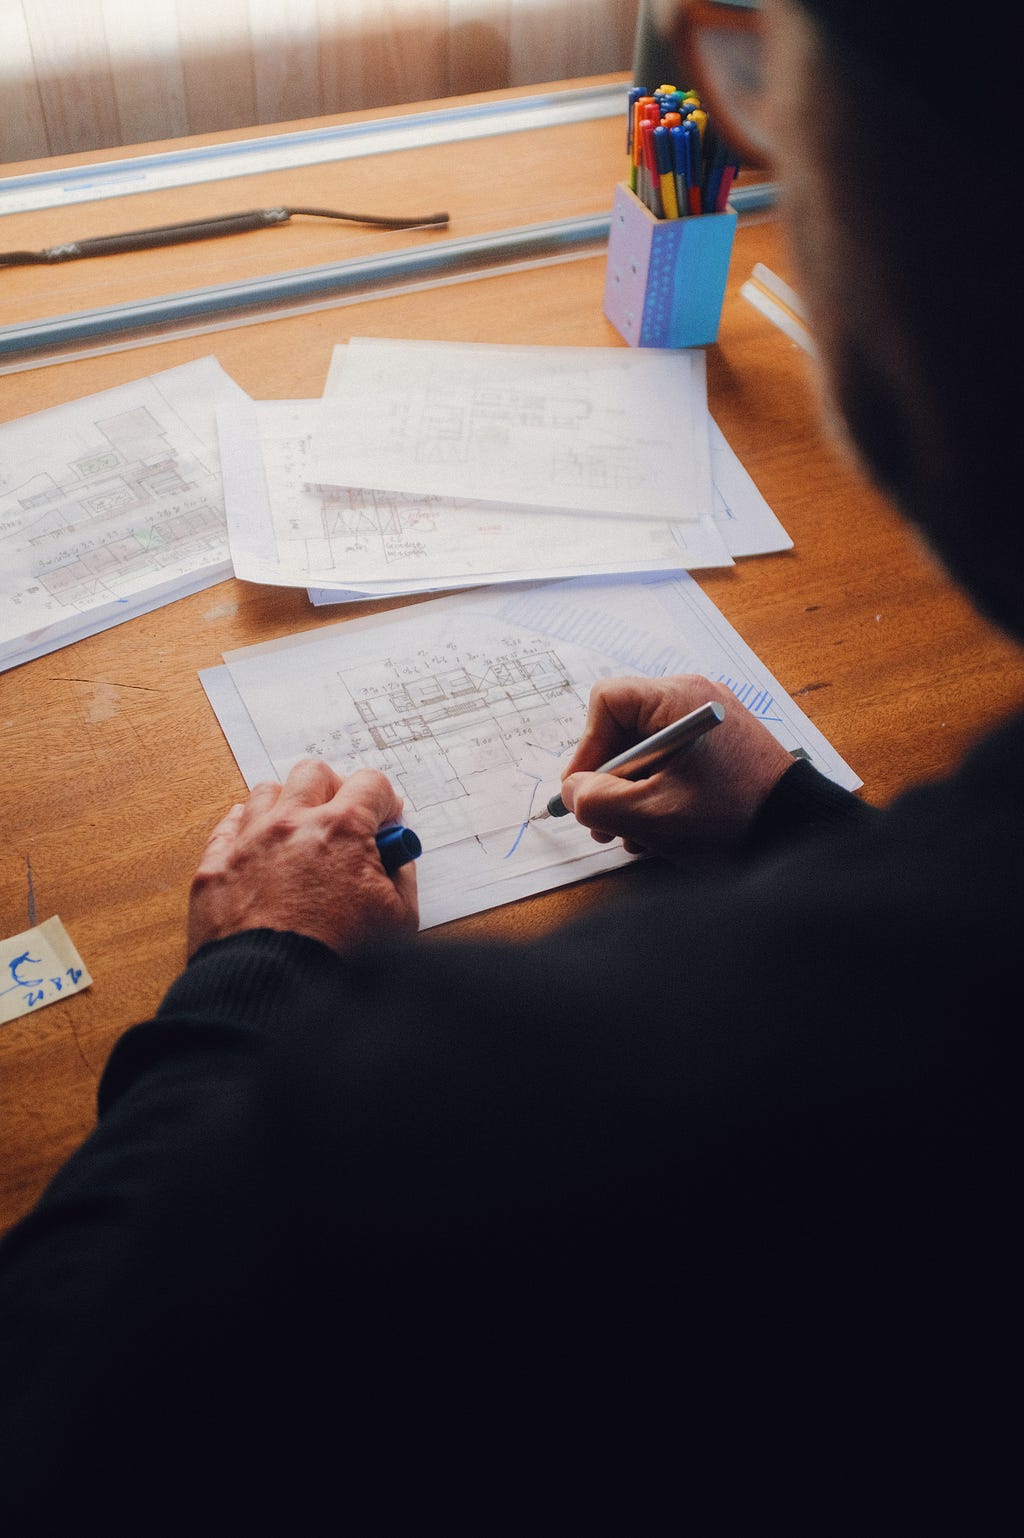 A photo of a desk with pieces of paper on it. One of the pieces is positioned in the center and is being worked on by a person wearing a black sweater and holding a pen in the right hand.